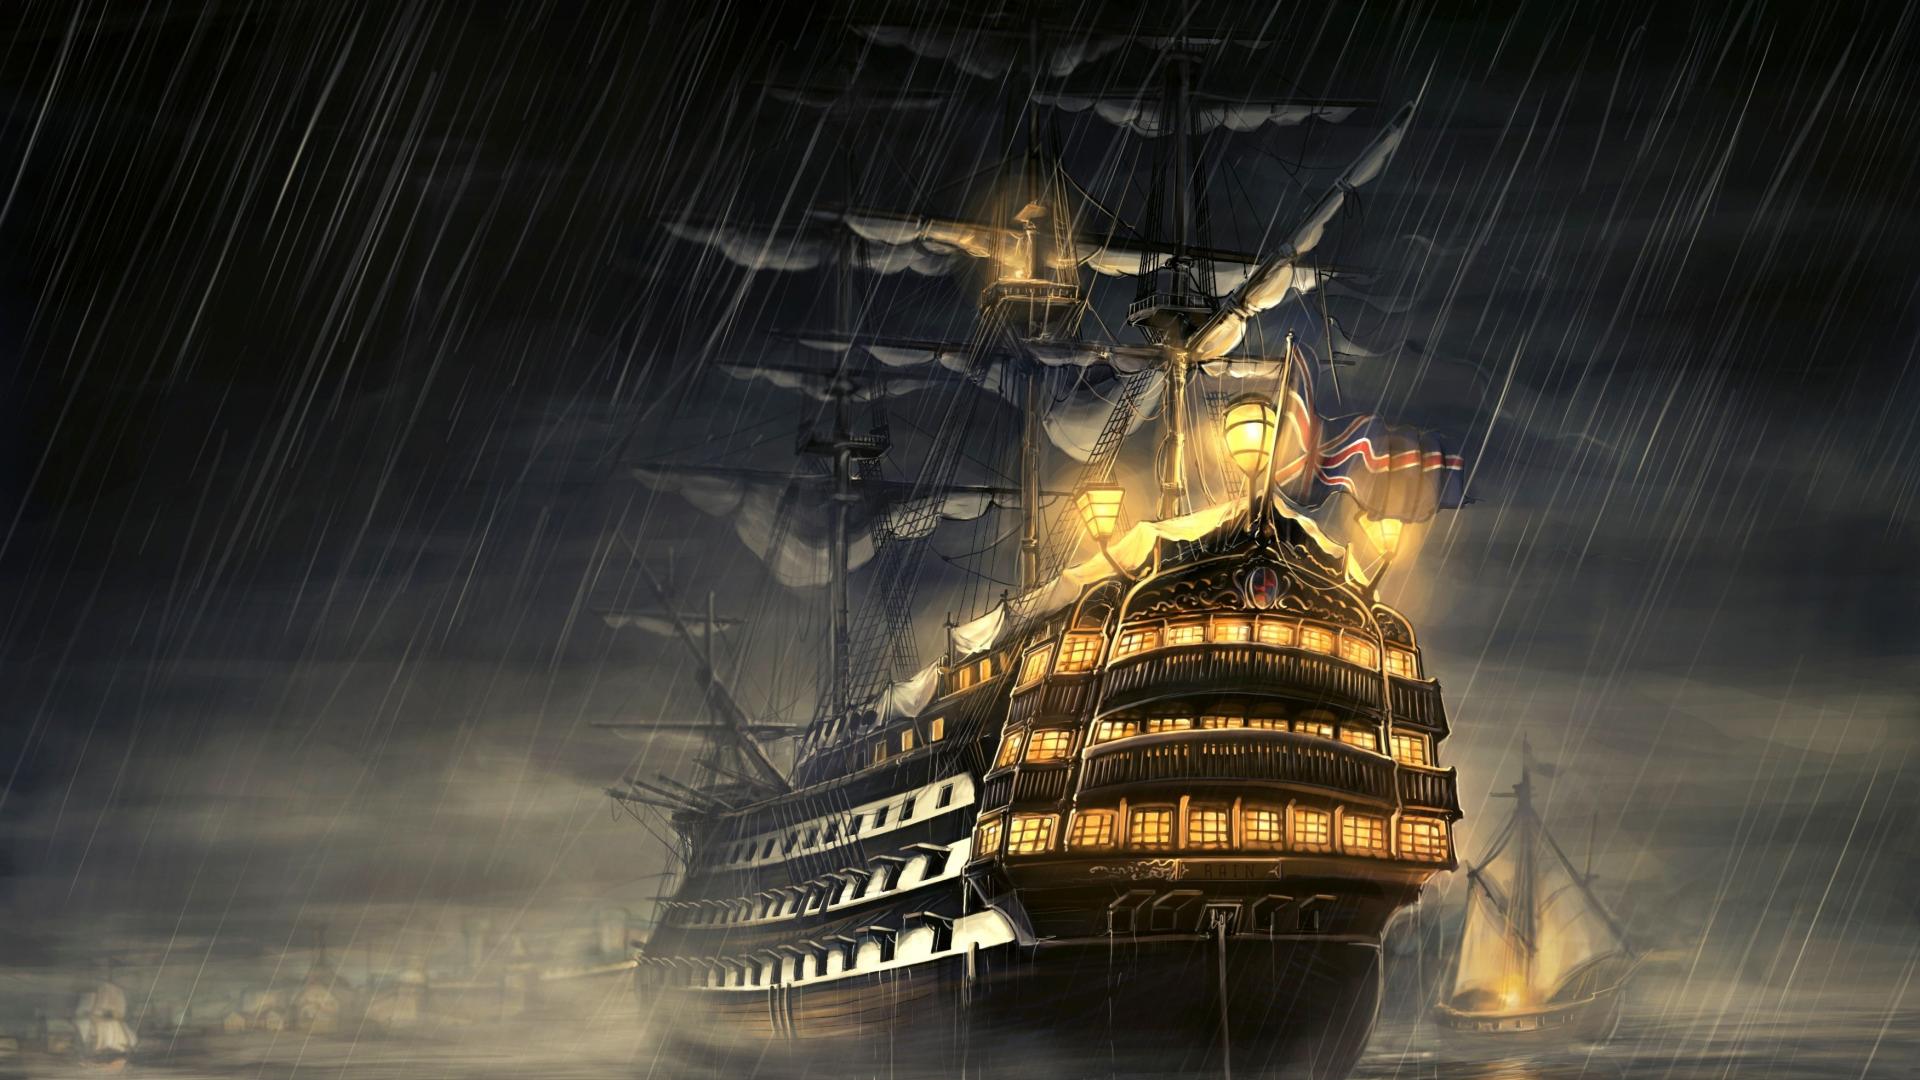 pirate wallpaper hd,manila galleon,first rate,sailing ship,galleon,ship of the line